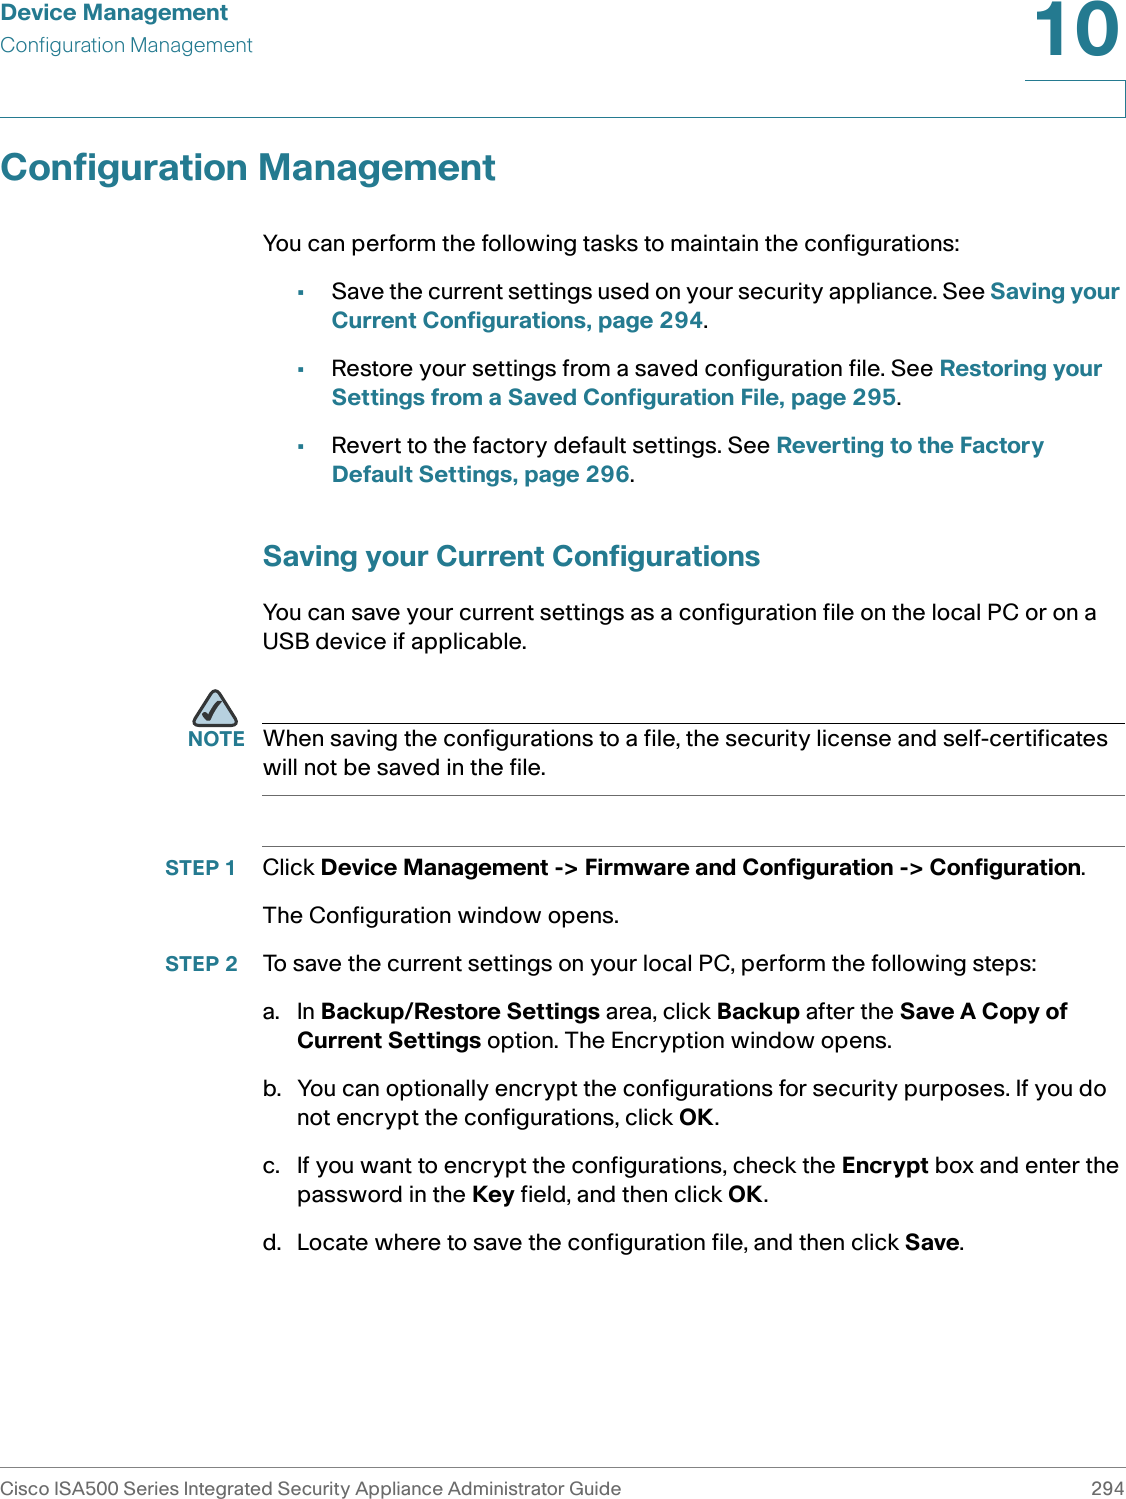 Device ManagementConfiguration ManagementCisco ISA500 Series Integrated Security Appliance Administrator Guide 29410 Configuration ManagementYou can perform the following tasks to maintain the configurations: •Save the current settings used on your security appliance. See Saving your Current Configurations, page 294.•Restore your settings from a saved configuration file. See Restoring your Settings from a Saved Configuration File, page 295.•Revert to the factory default settings. See Reverting to the Factory Default Settings, page 296. Saving your Current ConfigurationsYou can save your current settings as a configuration file on the local PC or on a USB device if applicable. NOTE When saving the configurations to a file, the security license and self-certificates will not be saved in the file. STEP 1 Click Device Management -&gt; Firmware and Configuration -&gt; Configuration.The Configuration window opens. STEP 2 To save the current settings on your local PC, perform the following steps: a. In Backup/Restore Settings area, click Backup after the Save A Copy of Current Settings option. The Encryption window opens. b. You can optionally encrypt the configurations for security purposes. If you do not encrypt the configurations, click OK. c. If you want to encrypt the configurations, check the Encrypt box and enter the password in the Key field, and then click OK.d. Locate where to save the configuration file, and then click Save. 